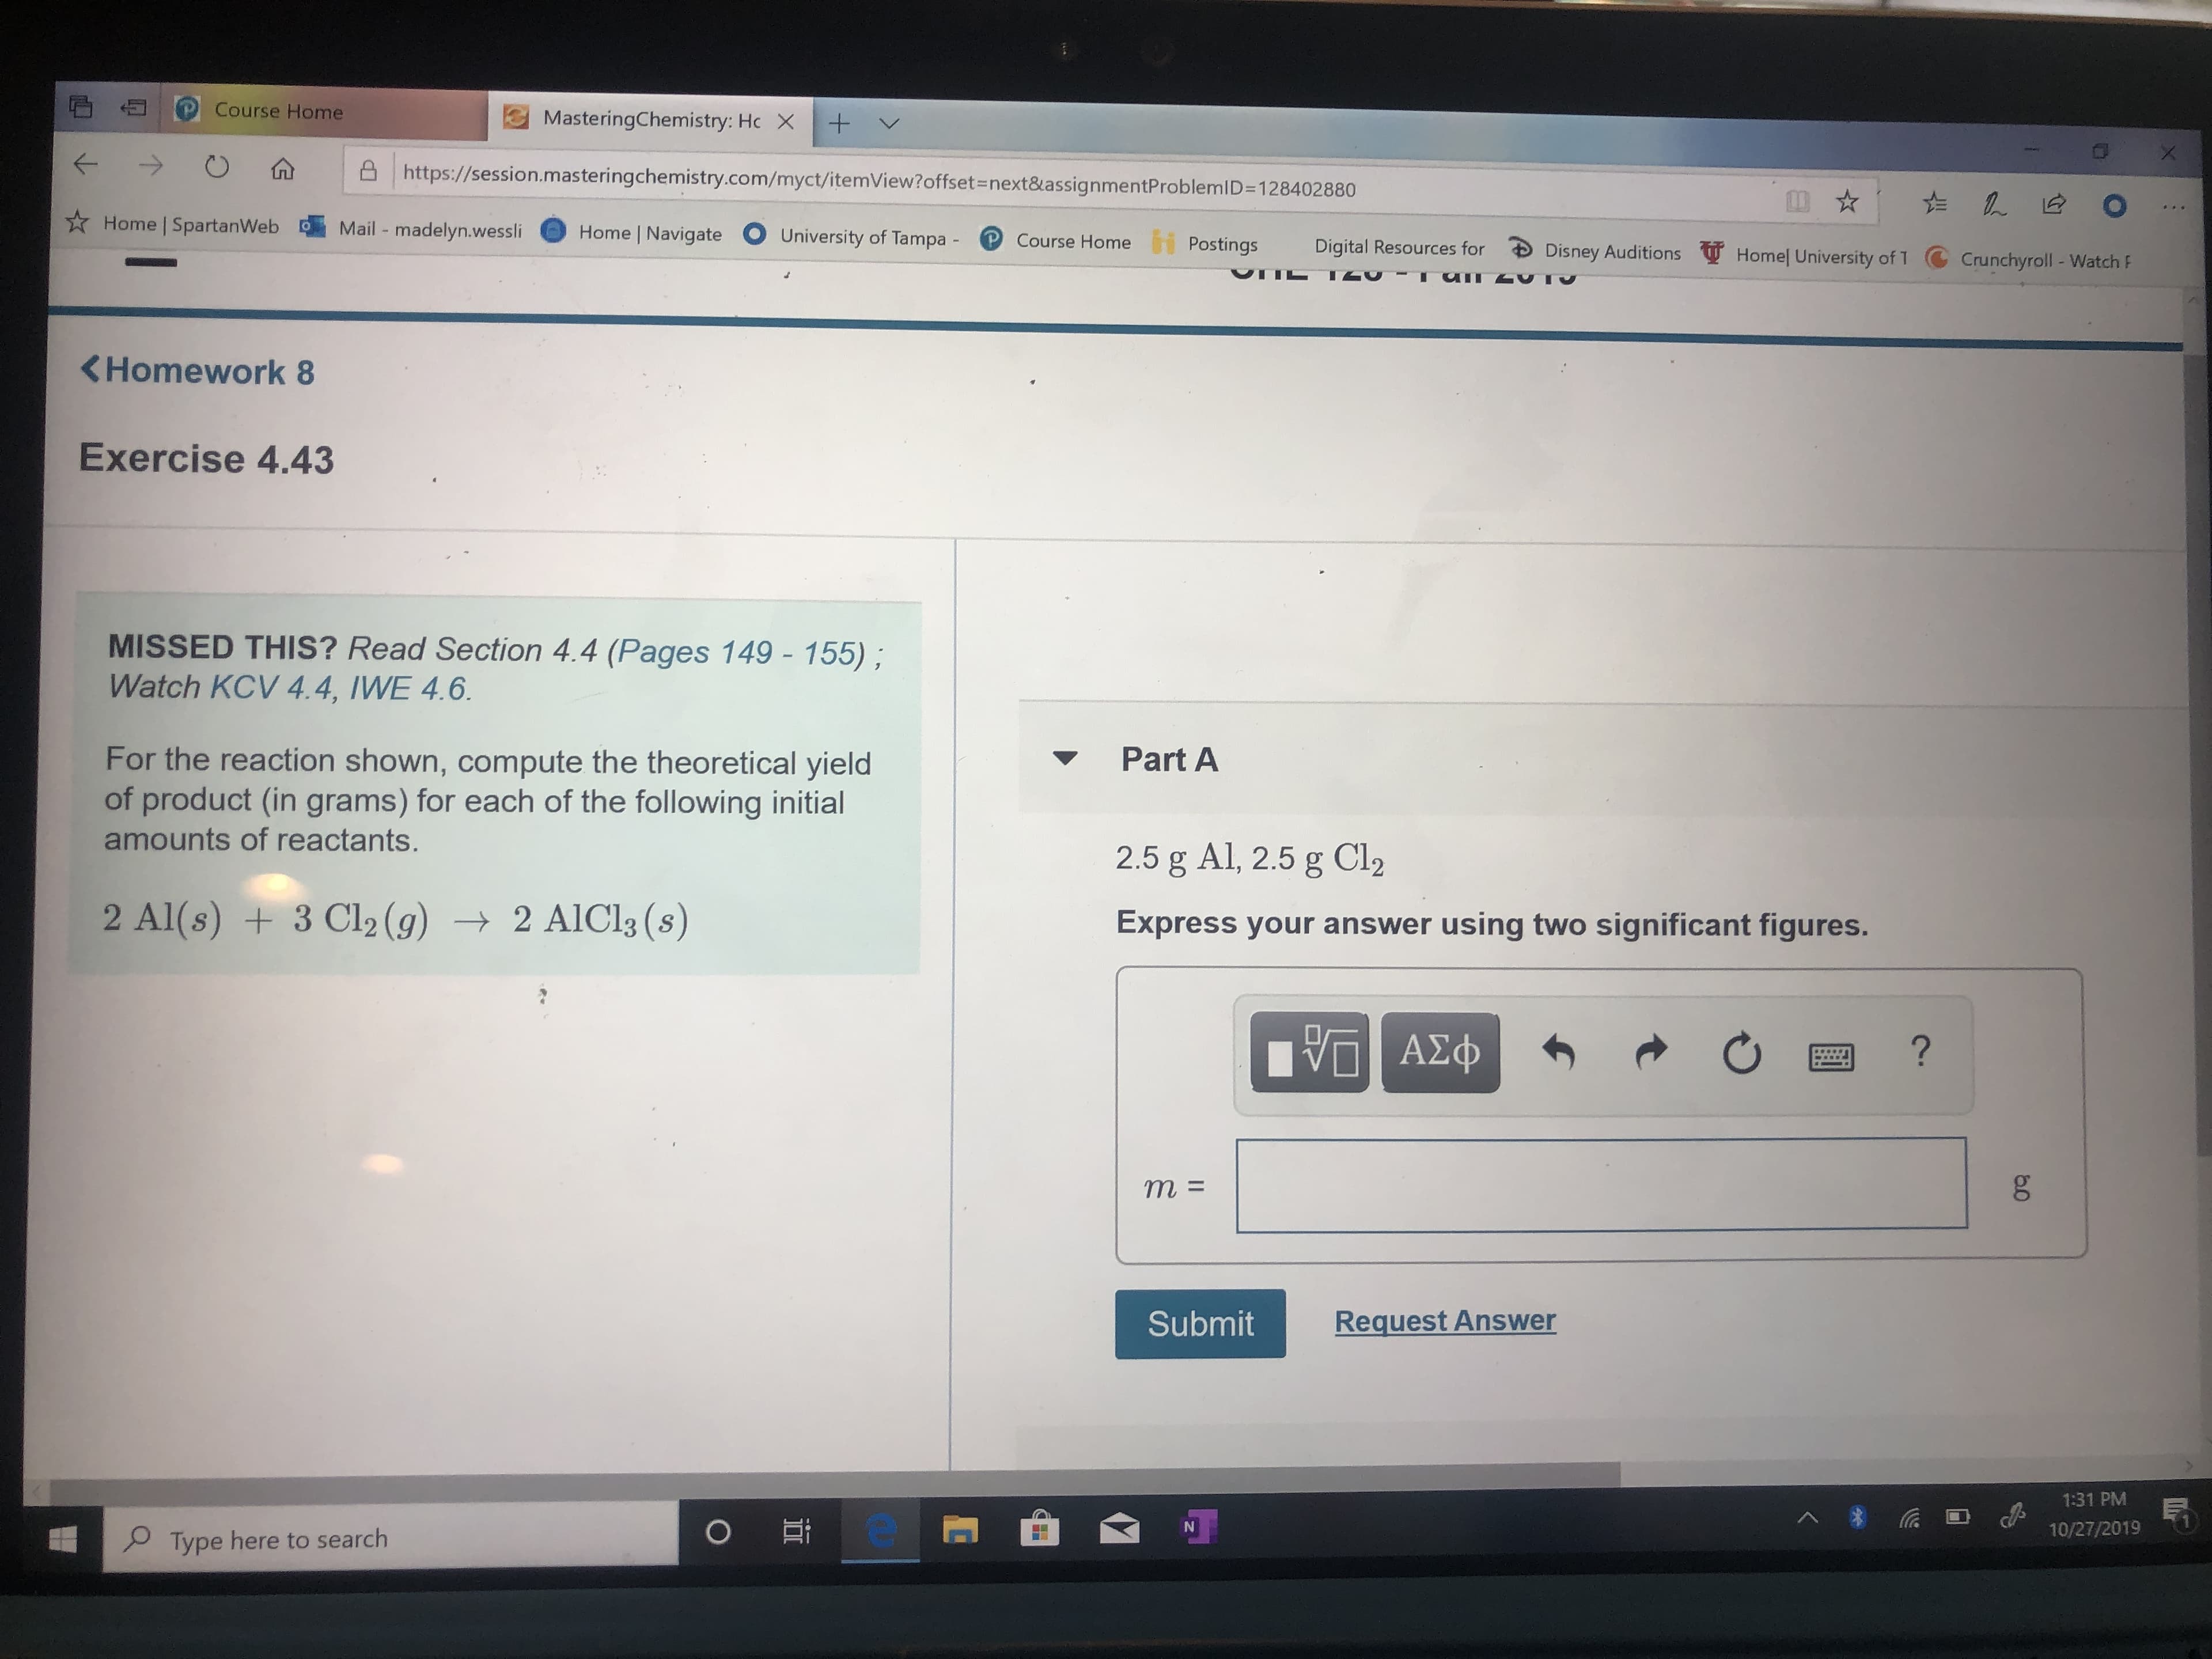 Course Home
MasteringChemistry: Hc X
+
https://session.masteringchemistry.com/myct/itemView?offset=next&assignmentProblemID=128402880
O
Home SpartanWeb
Mail -madelyn.wessli
Home Navigate
University of Tampa
Course Home
Postings
Digital Resources for
Dis ney Auditions
Homel University of 1
Crunchyroll - Watch F
T
<Homework 8
Exercise 4.43
MISSED THIS? Read Section 4.4 (Pages 149 - 155);
Watch KCV 4.4, IWE 4.6.
For the reaction shown, compute the theoretical yield
of product (in grams) for each of the following initial
amounts of reactants.
Part A
2.5 g Al, 2.5 g Cl2
2 Al(s) 3 Cl2 (g)
2 AICI3 (s
Express your answer using two significant figures.
ΑΣφ
?
m =
Request Answer
Submit
1:31 PM
1
OEt
10/27/2019
Type here to search
